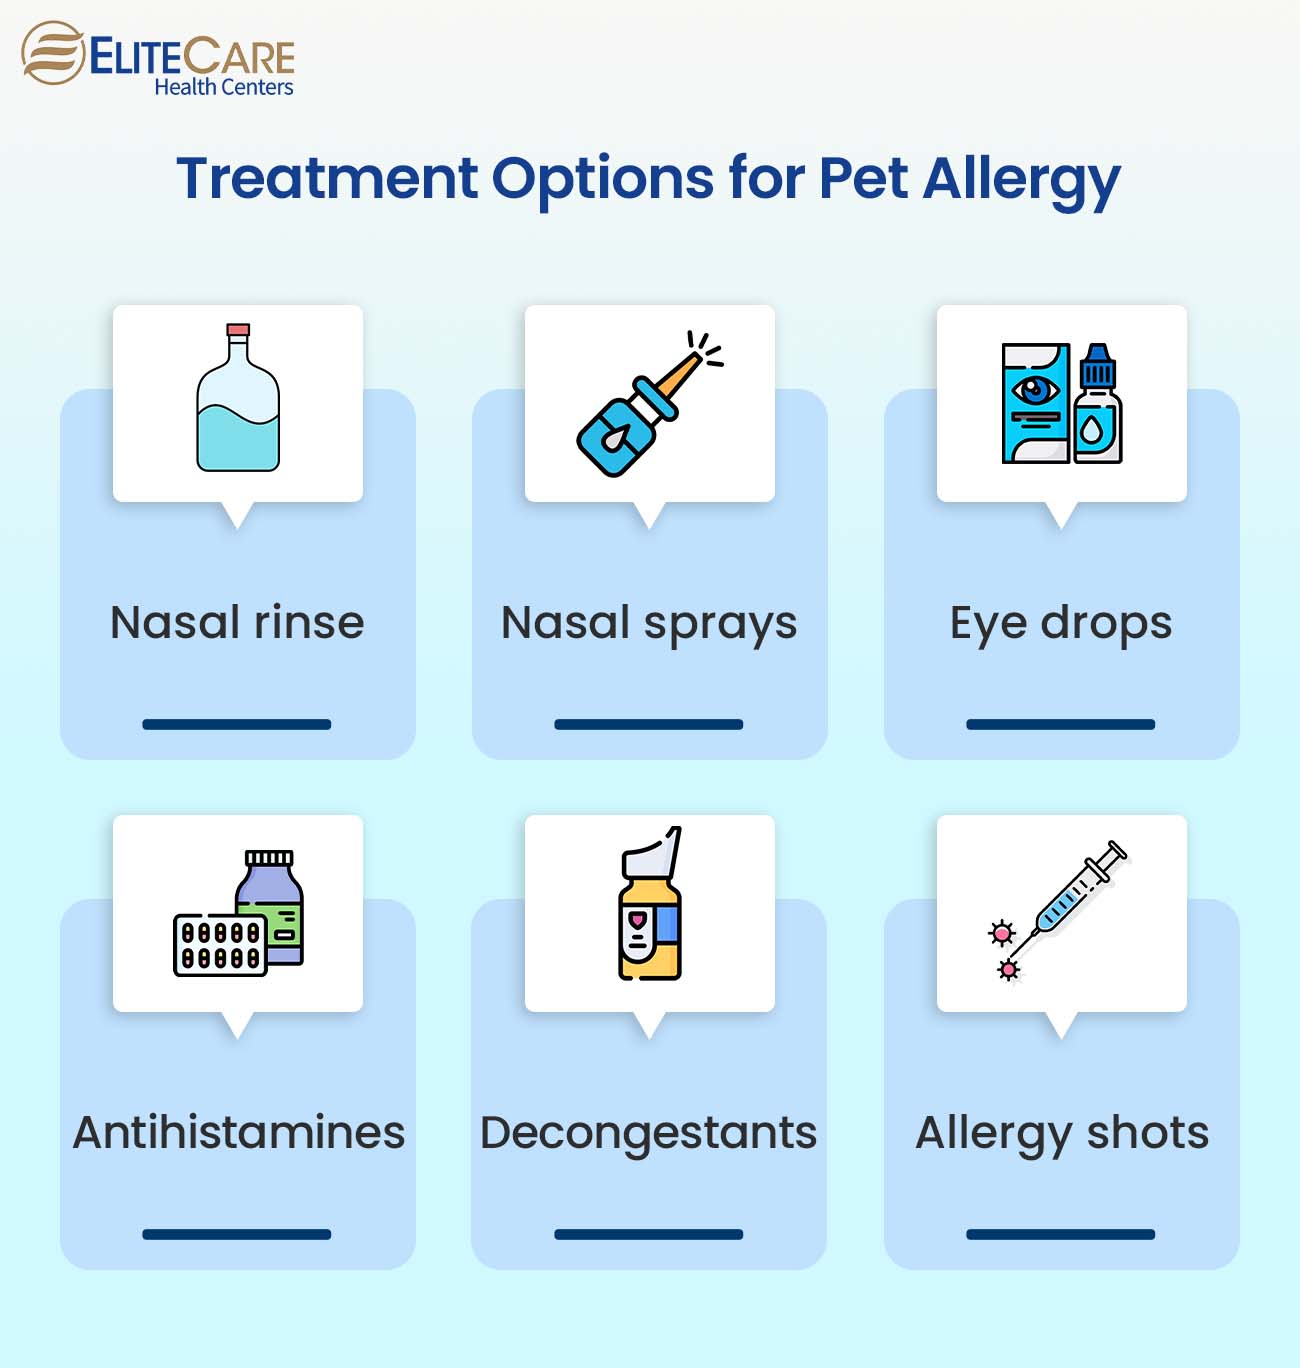 Treatment Options for Pet Allergy